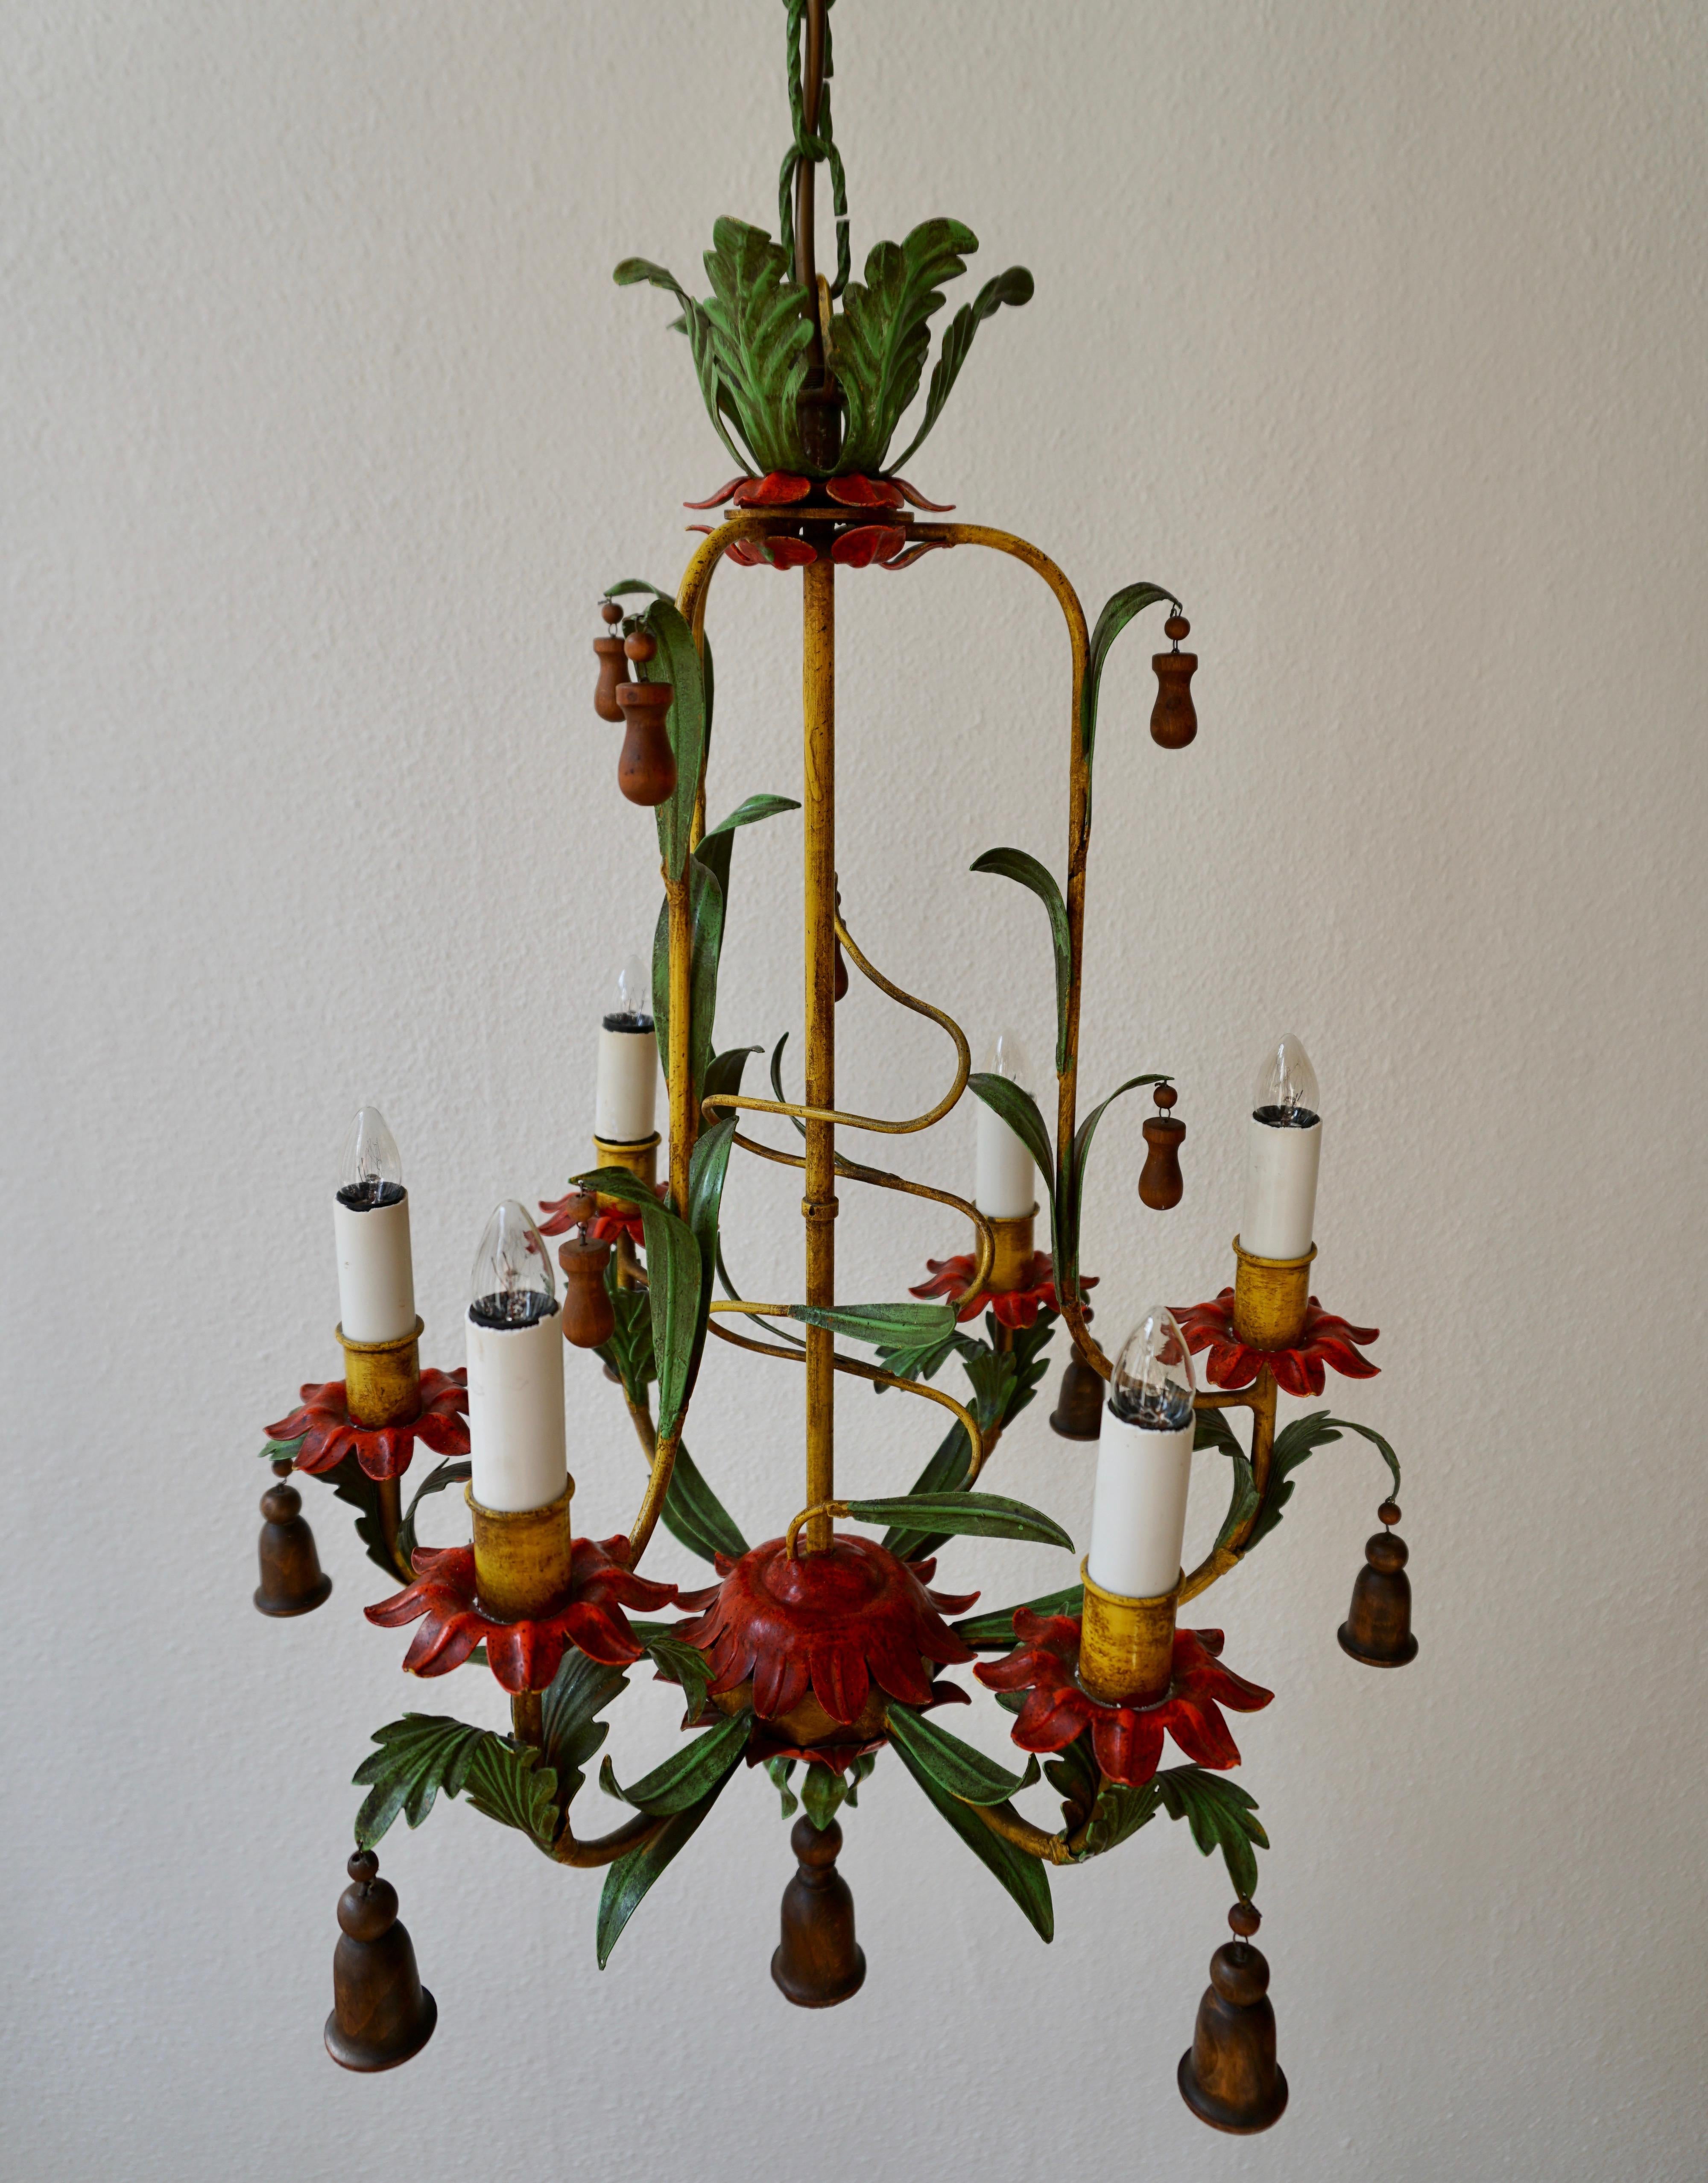 Beautiful iron painted chandelier with wooden bells.
Dimension: Diameter 48 cm.
Height fixture 65 cm.
Total height with chain 110 cm.
Six E14 bulbs.